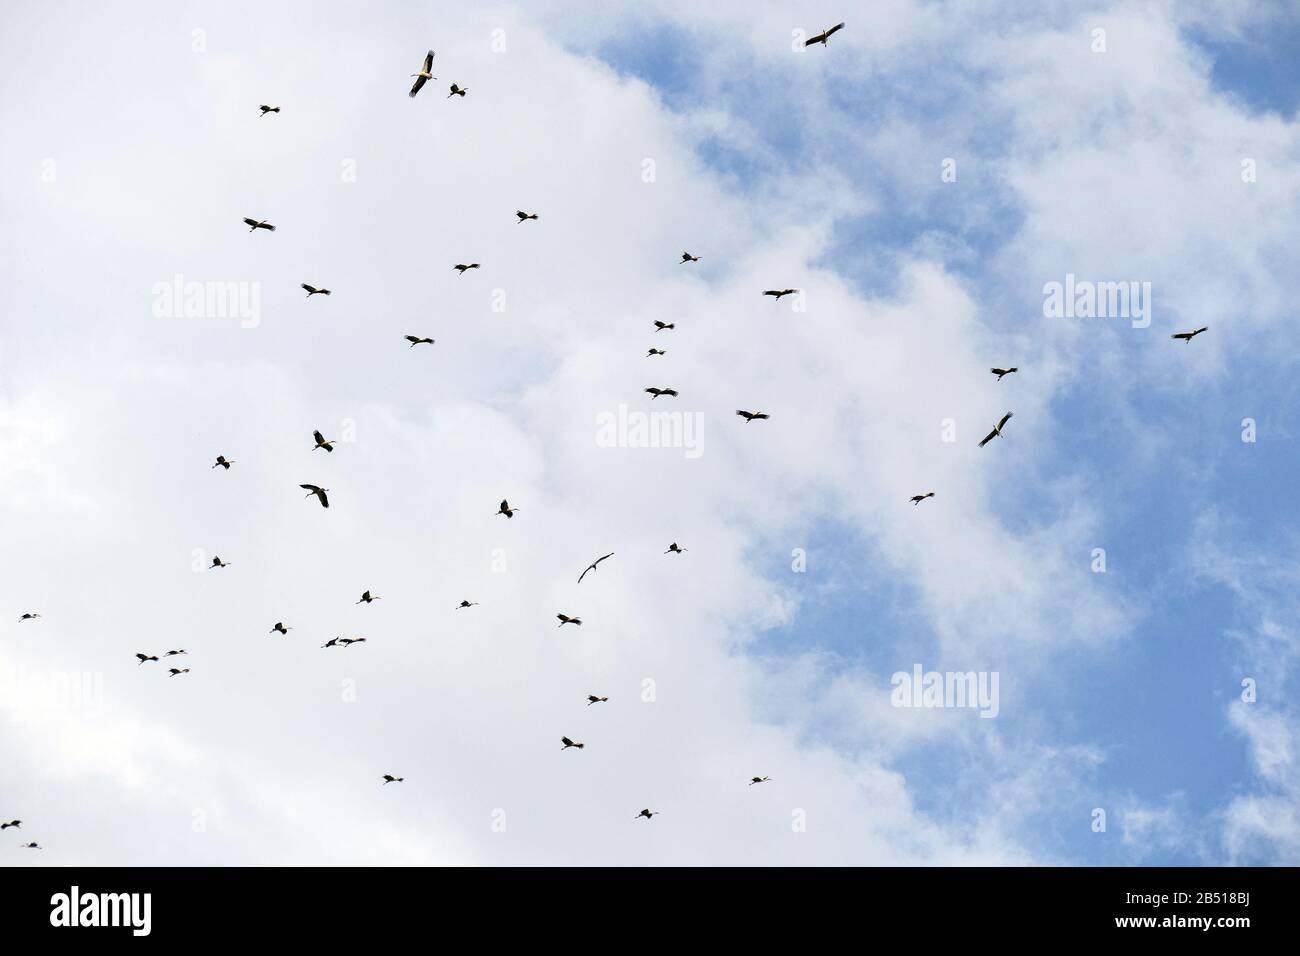 A flock of storks fly together in the sky. They gather to fly south. Stock Photo